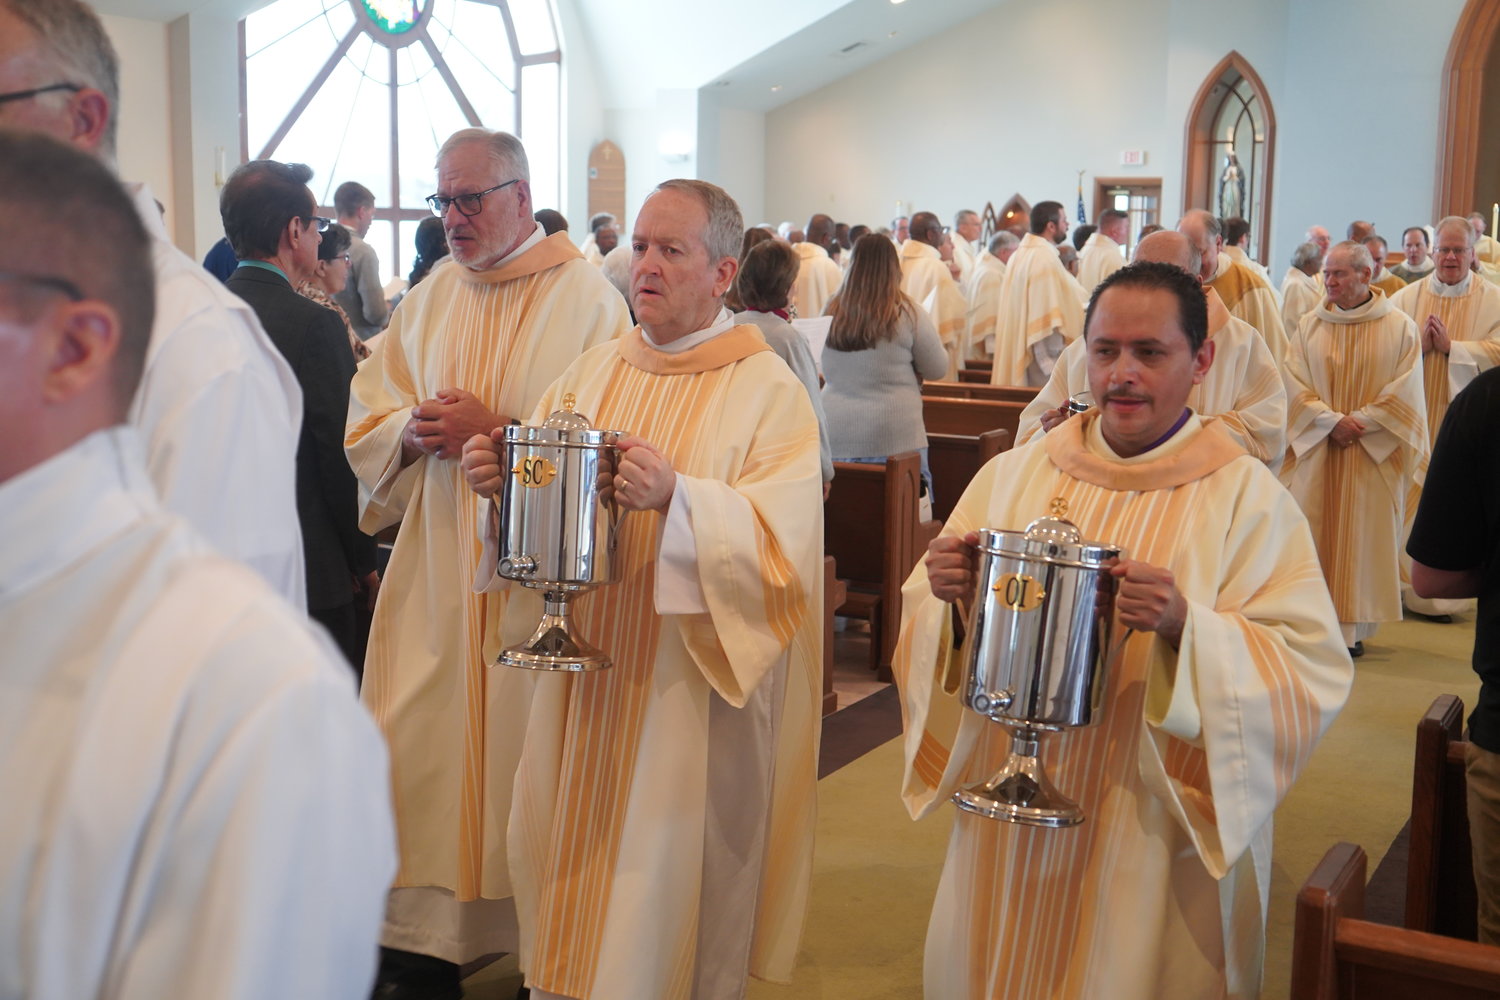 Deacon John Neudecker, Deacon Bruce Mobley and Deacon Edwin Pacheco process out of St. Andrew Church at the end of the Chrism Mass.